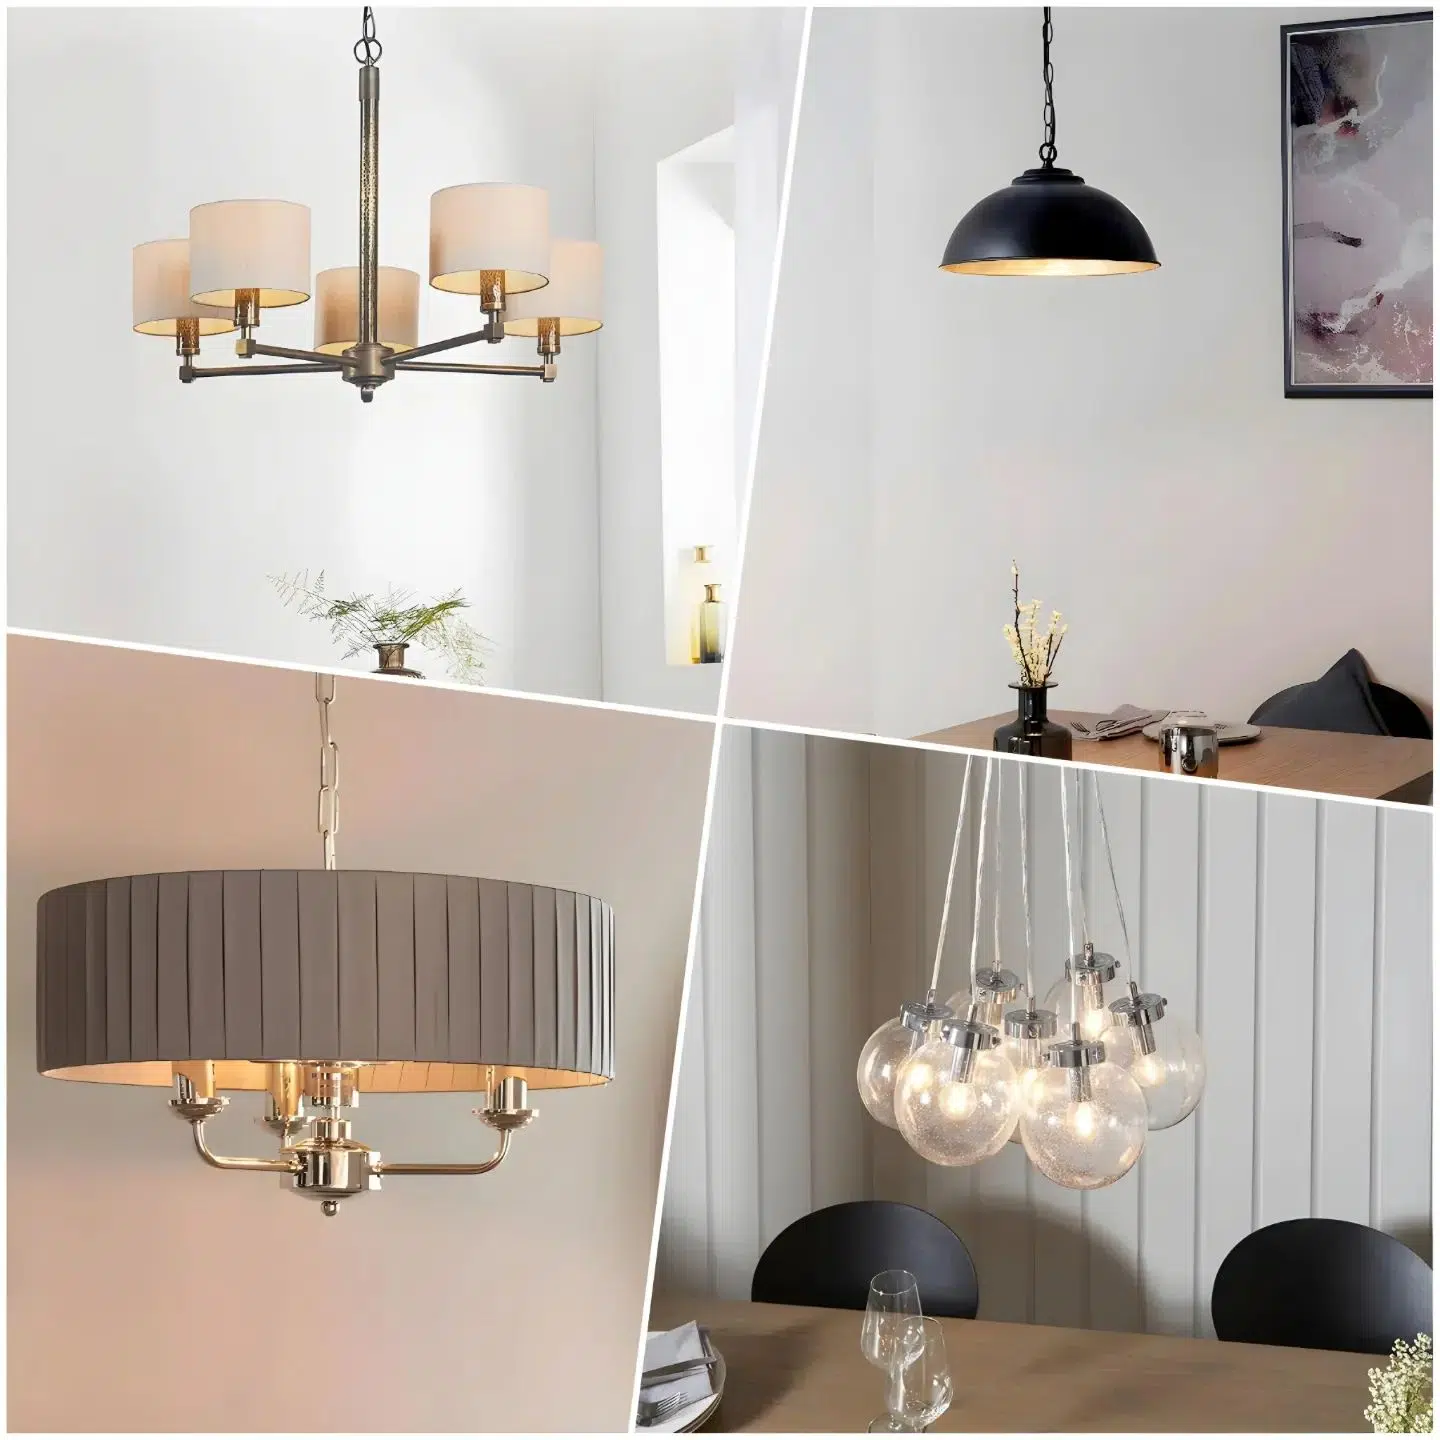 Visit stillorgandecor.ie and explore our Lighting Collection including our  . 💡

Available for collection in-store and delivery nationwide.